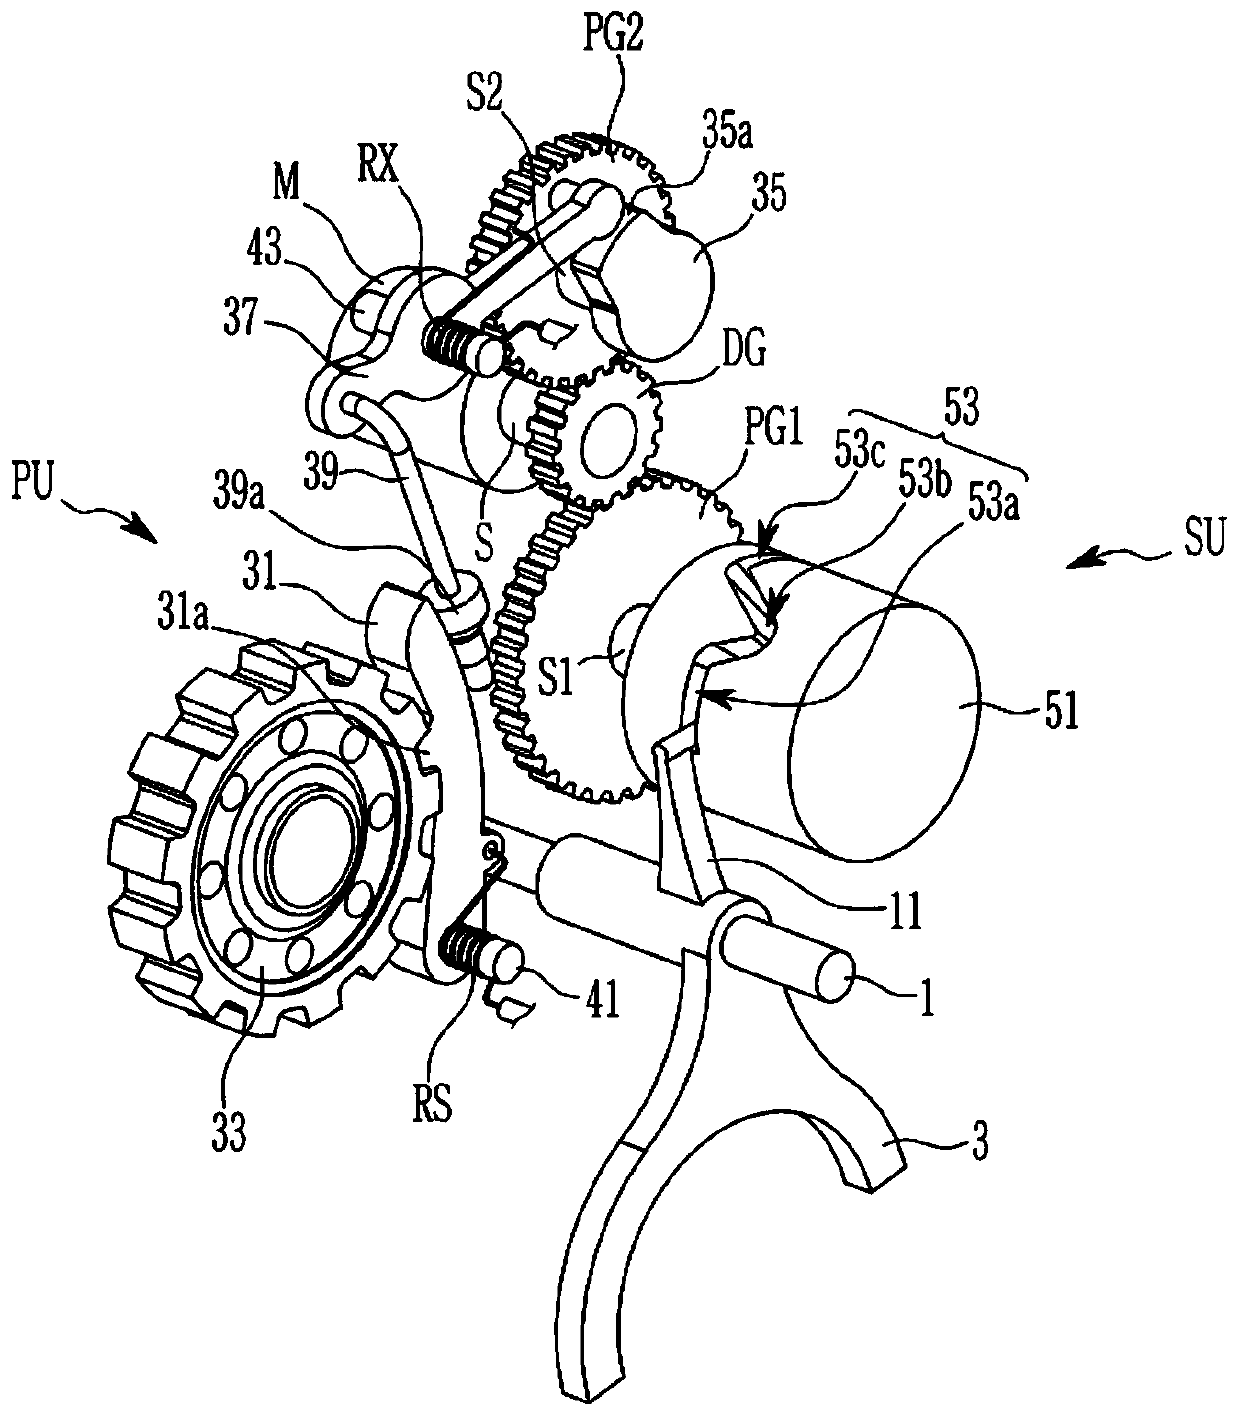 Gear shifting device for multi-speed transmission of electric vehicles